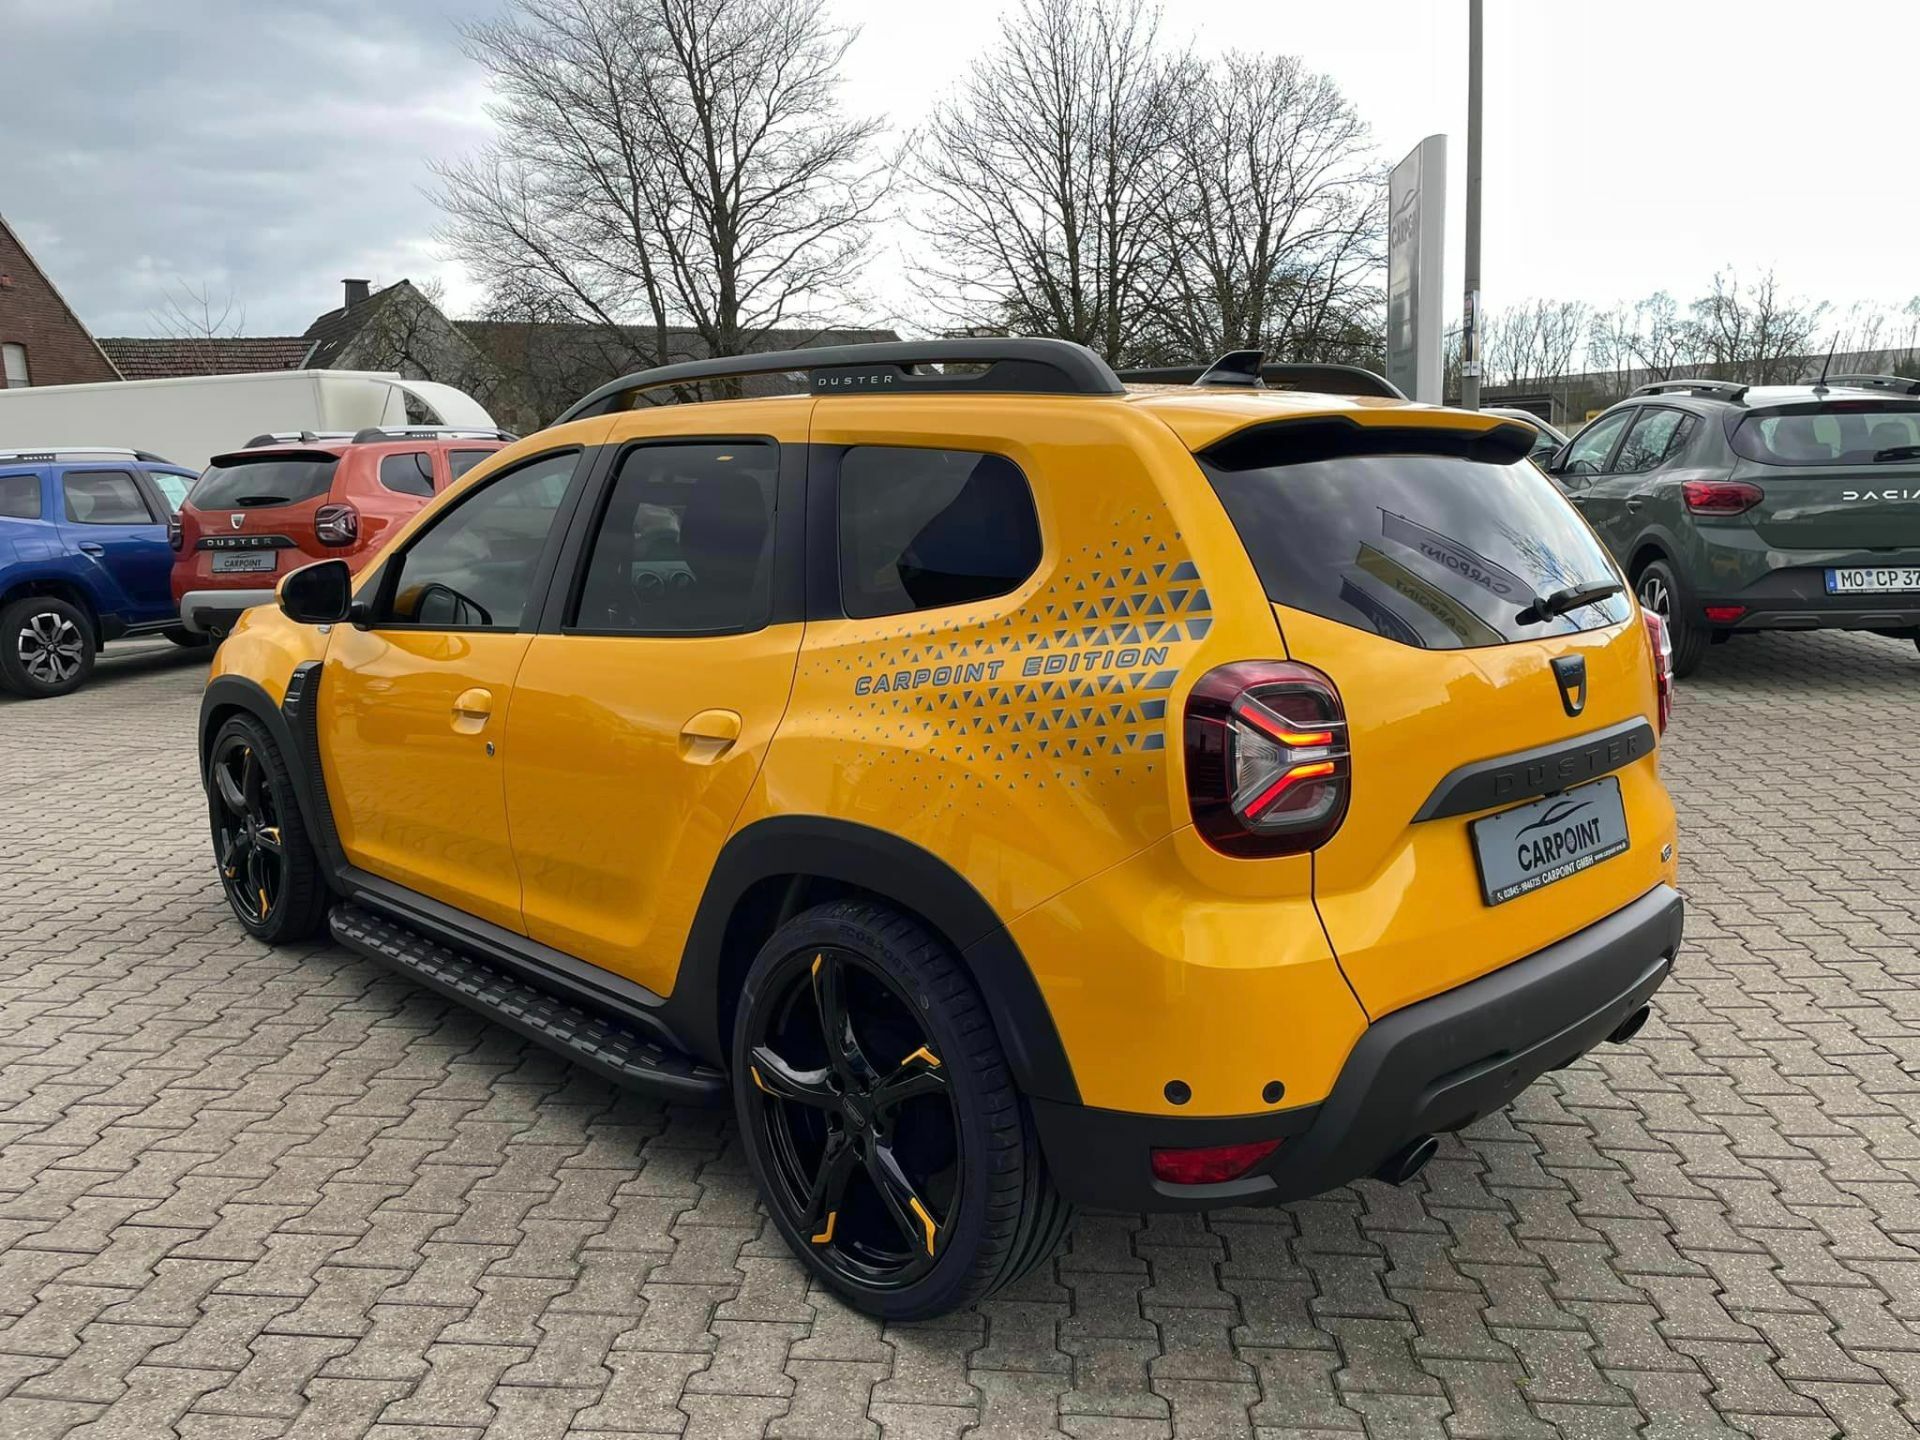 Dacia Duster Gets A Low-Ride Sporty Makeover With CarPoint Yellow Edition